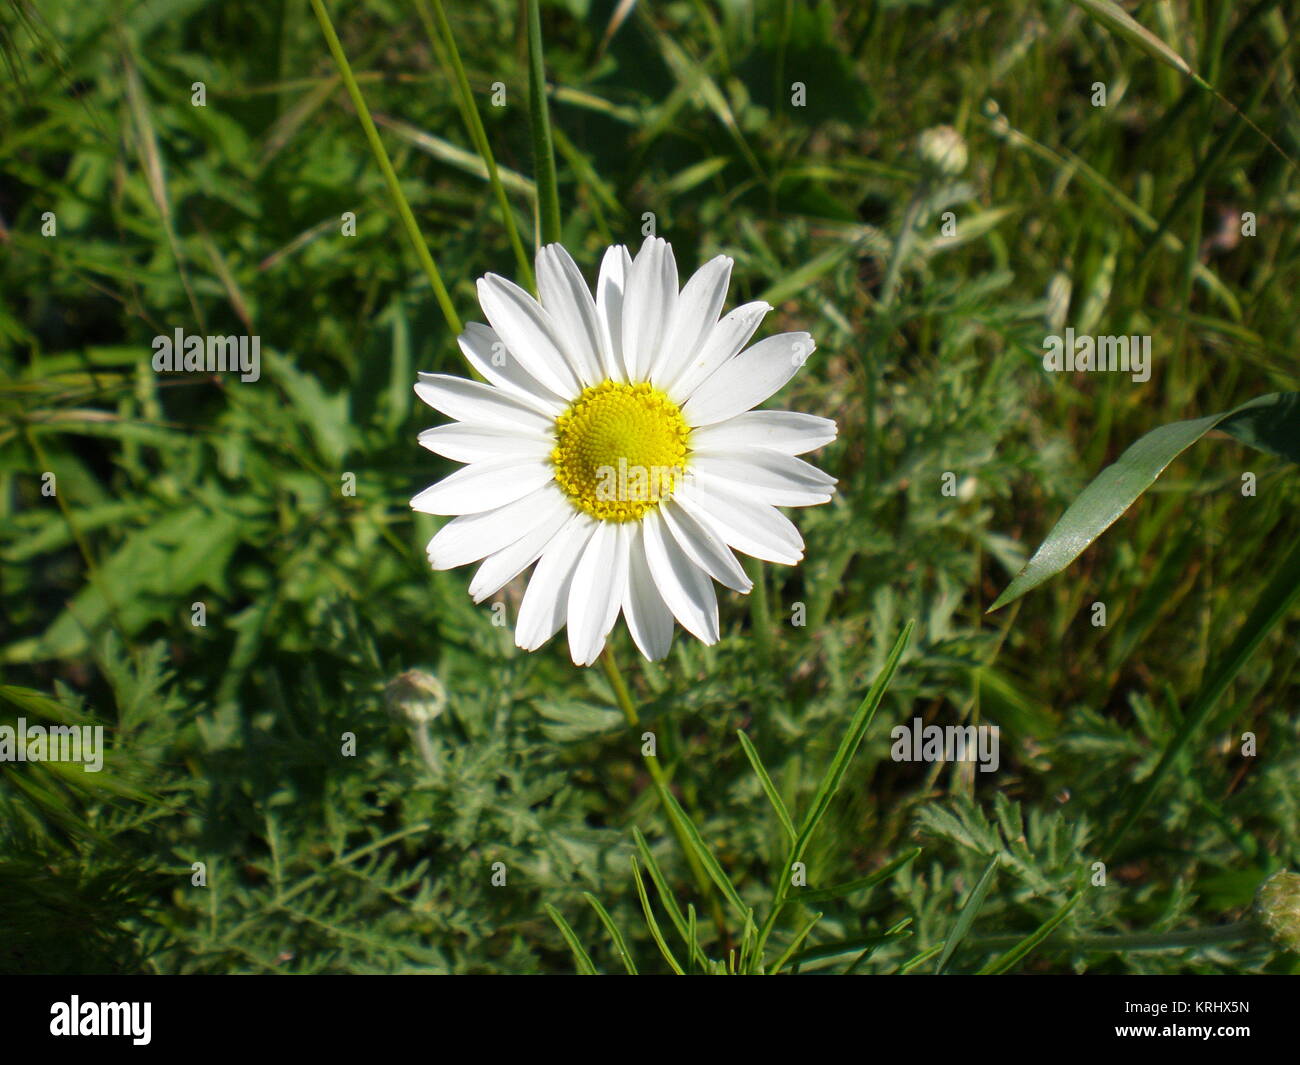 Camomile on a grass background Stock Photo